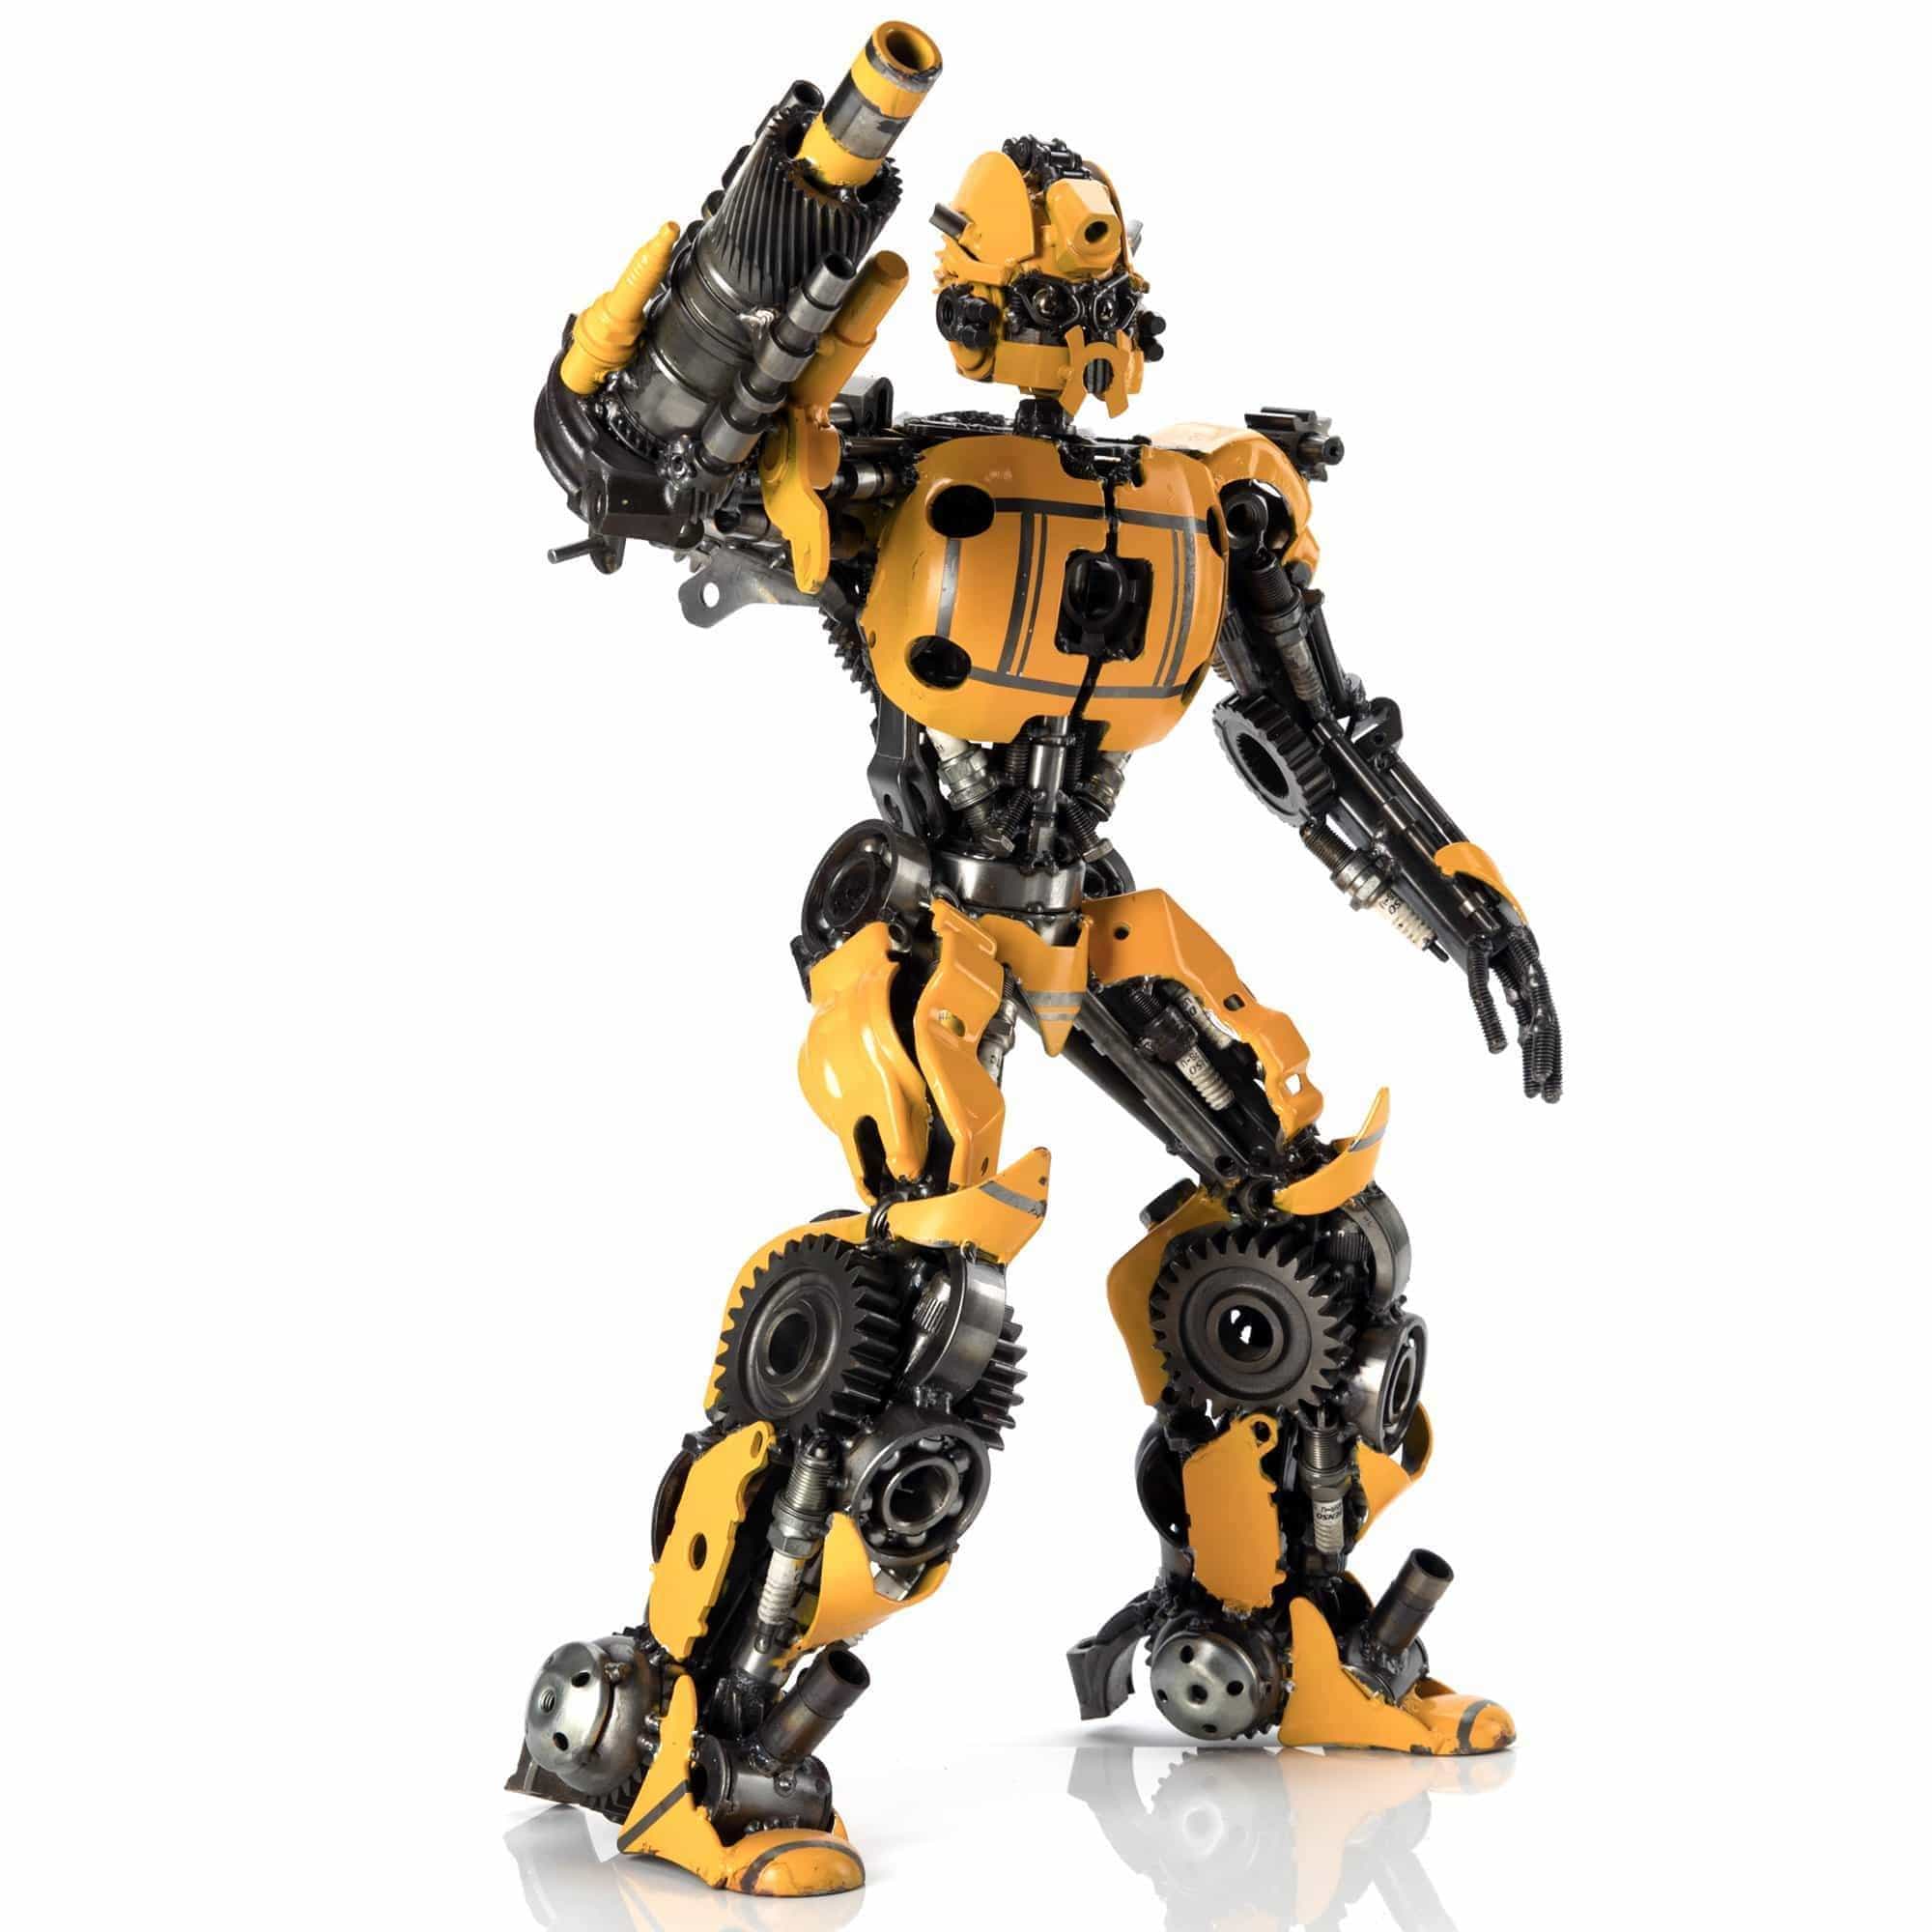 Kalifano Recycled Metal Art 22" Bumblebee Inspired Recycled Metal Sculpture RMS-BB57x35-S